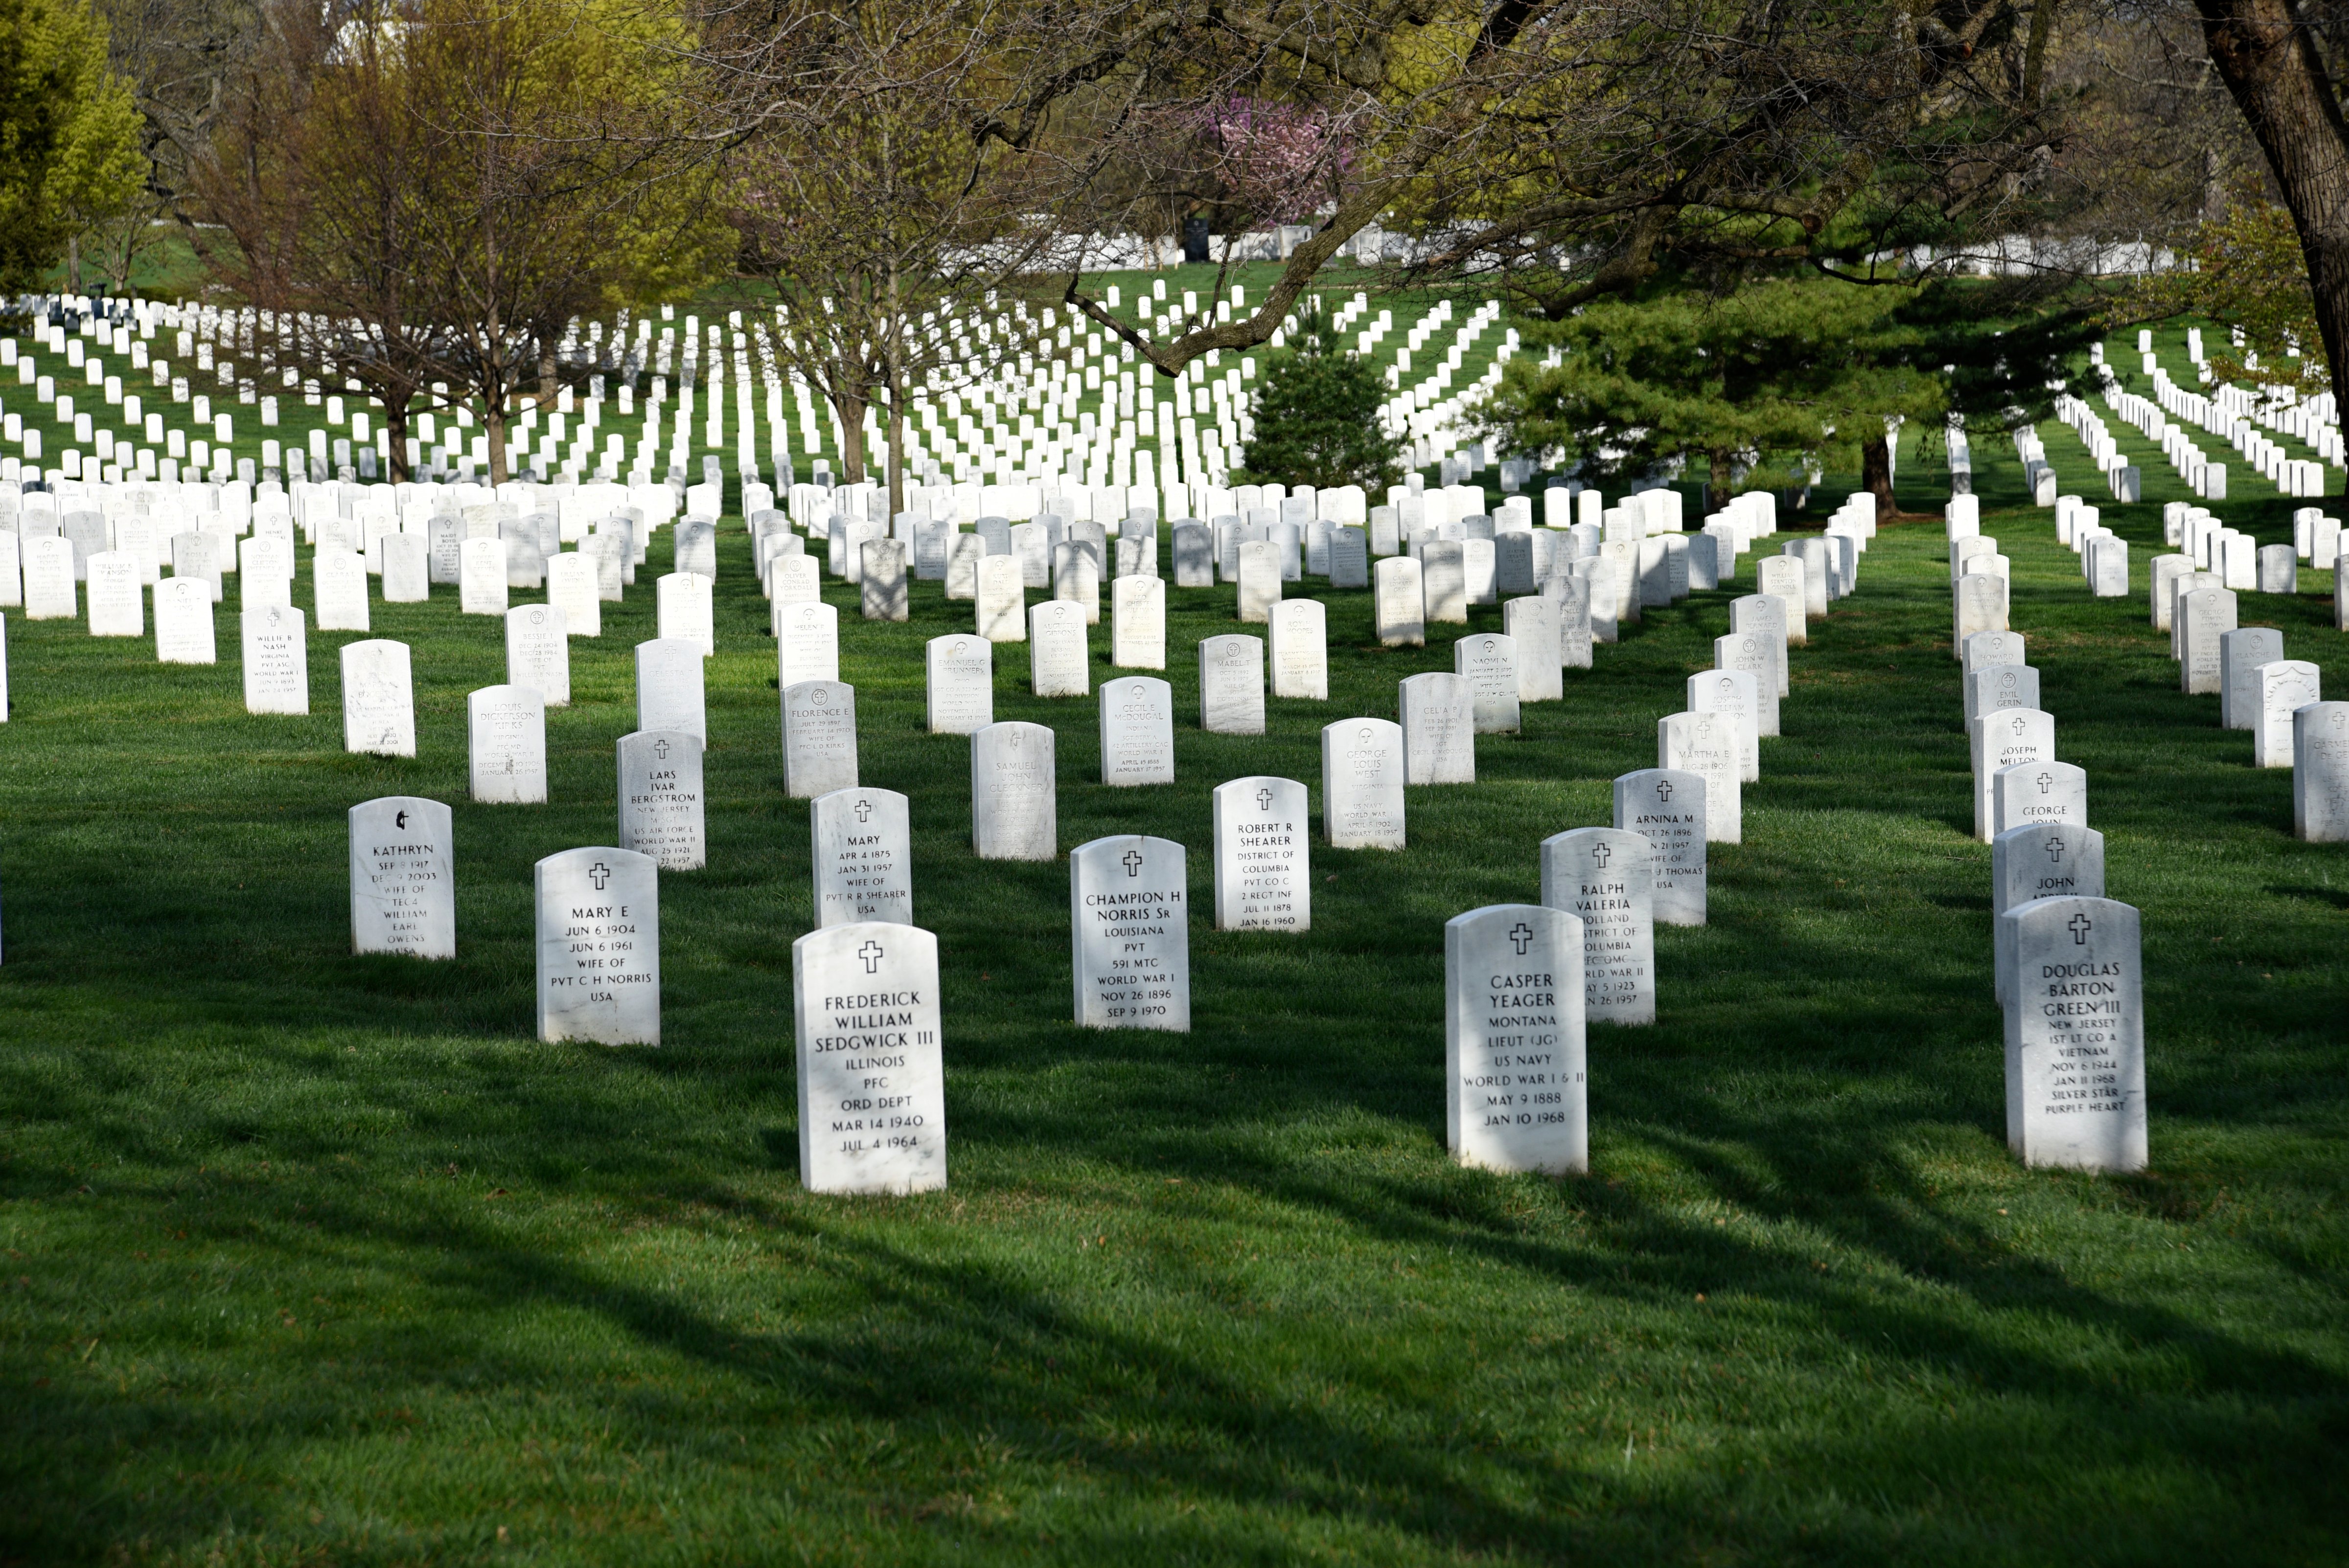 The graves of U.S. veterans and their spouses fill Arlington National Cemetery near Washington, D.C. (Robert Alexander—Geetty Images)